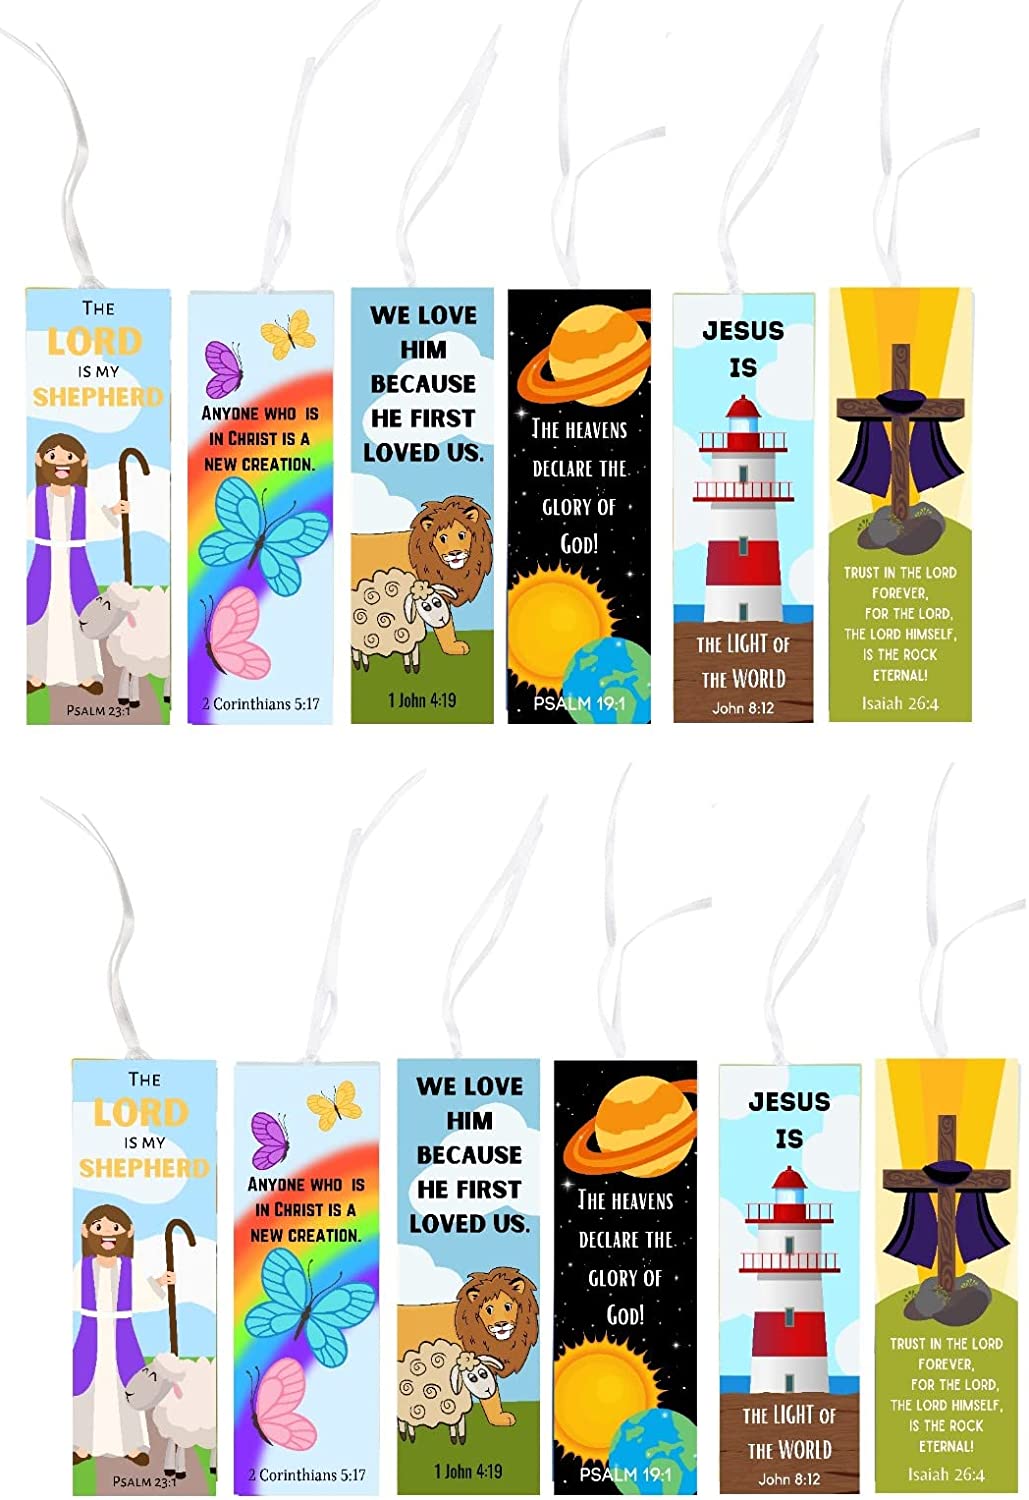 Wholesale Religious Christian Bible Verse Bookmark Assortment For Kids VBS Church (72 Pack)